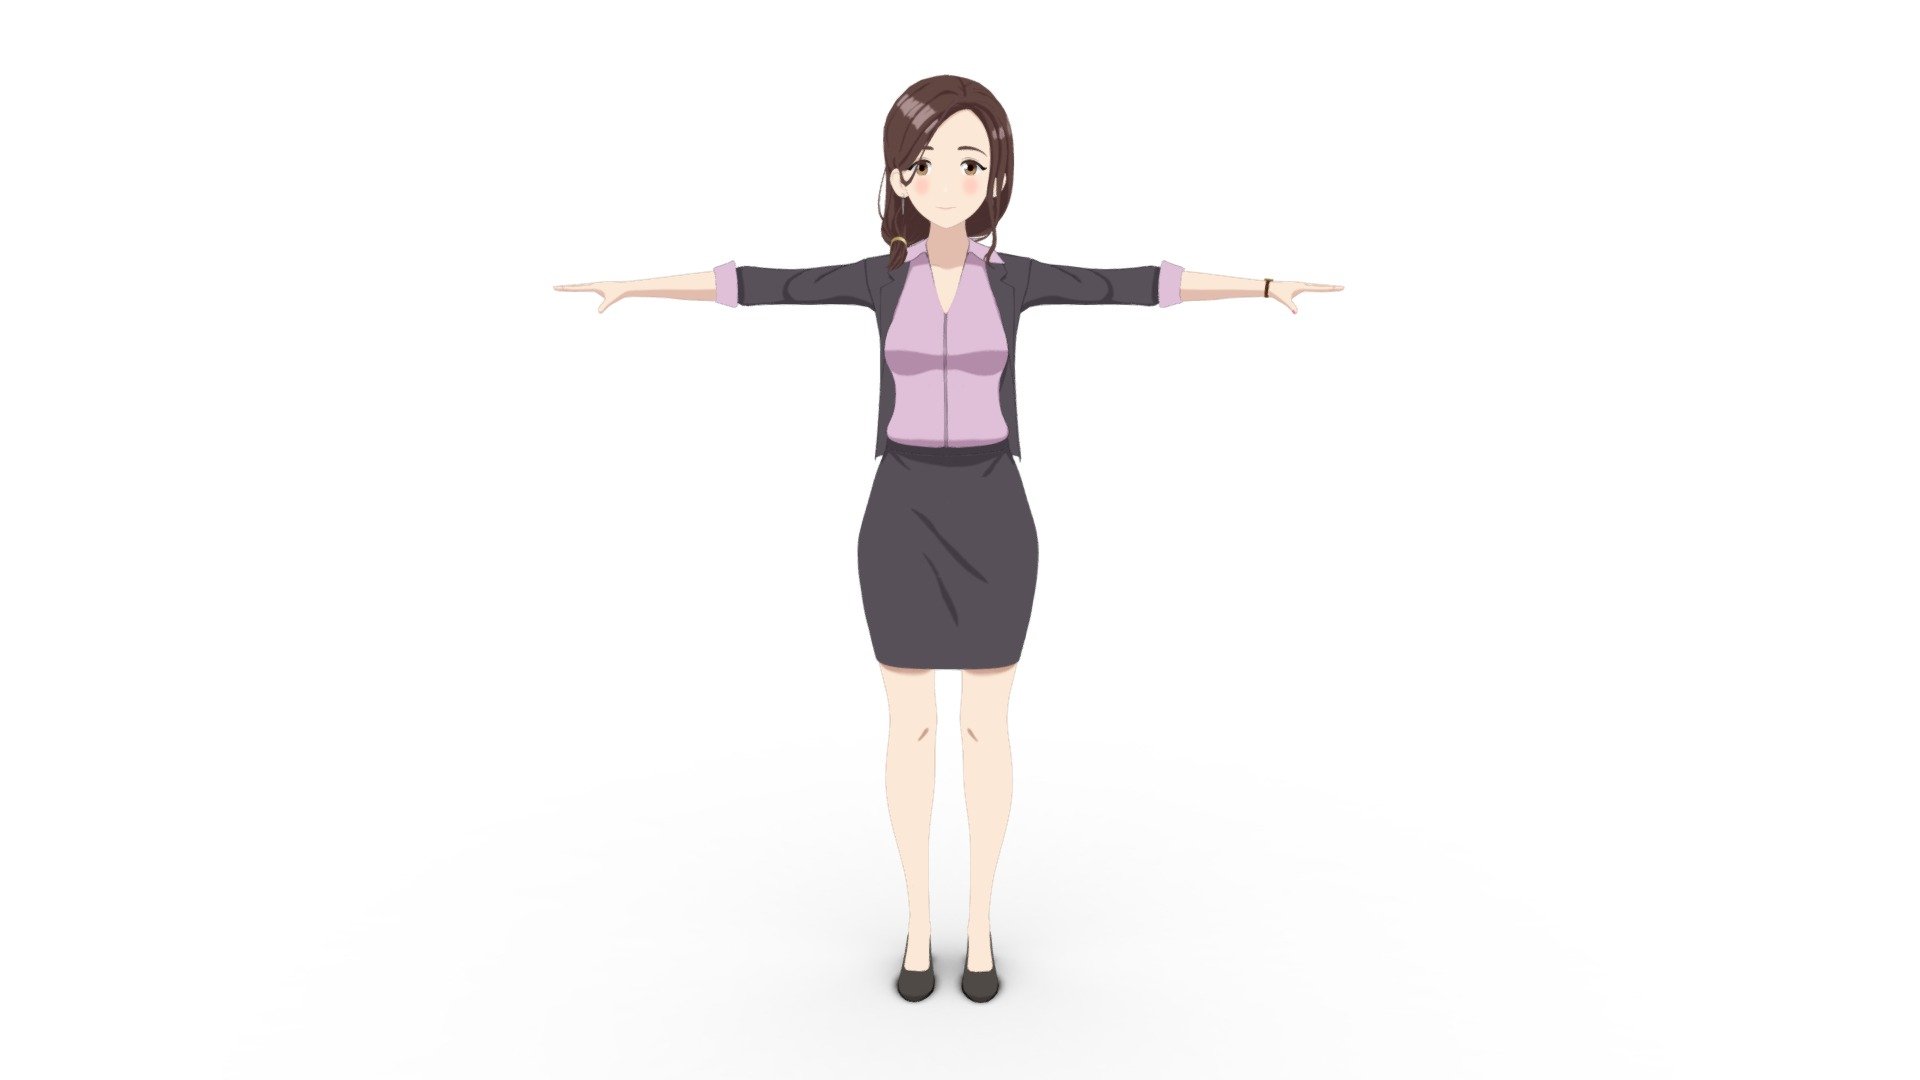 Airi Gotou is a supporting character in the Hige wo Soru. Soshite Joshikousei wo Hirou. series. She is Yoshida's boss at the IT company he is working for and his primary love interest.

Follow:
Instagram
Twitter

Download character rigged

Updates:



2 - Rig: Added a non-complete rig. It is necessary to install the addon that comes with the file. (Blender 3.2 used) 



1 - Fix: I improved the proportion of the arms


 - Airi Gotou - Hige wo Soru - Download Free 3D model by LessaB3D (@thiagolessa90) 3d model